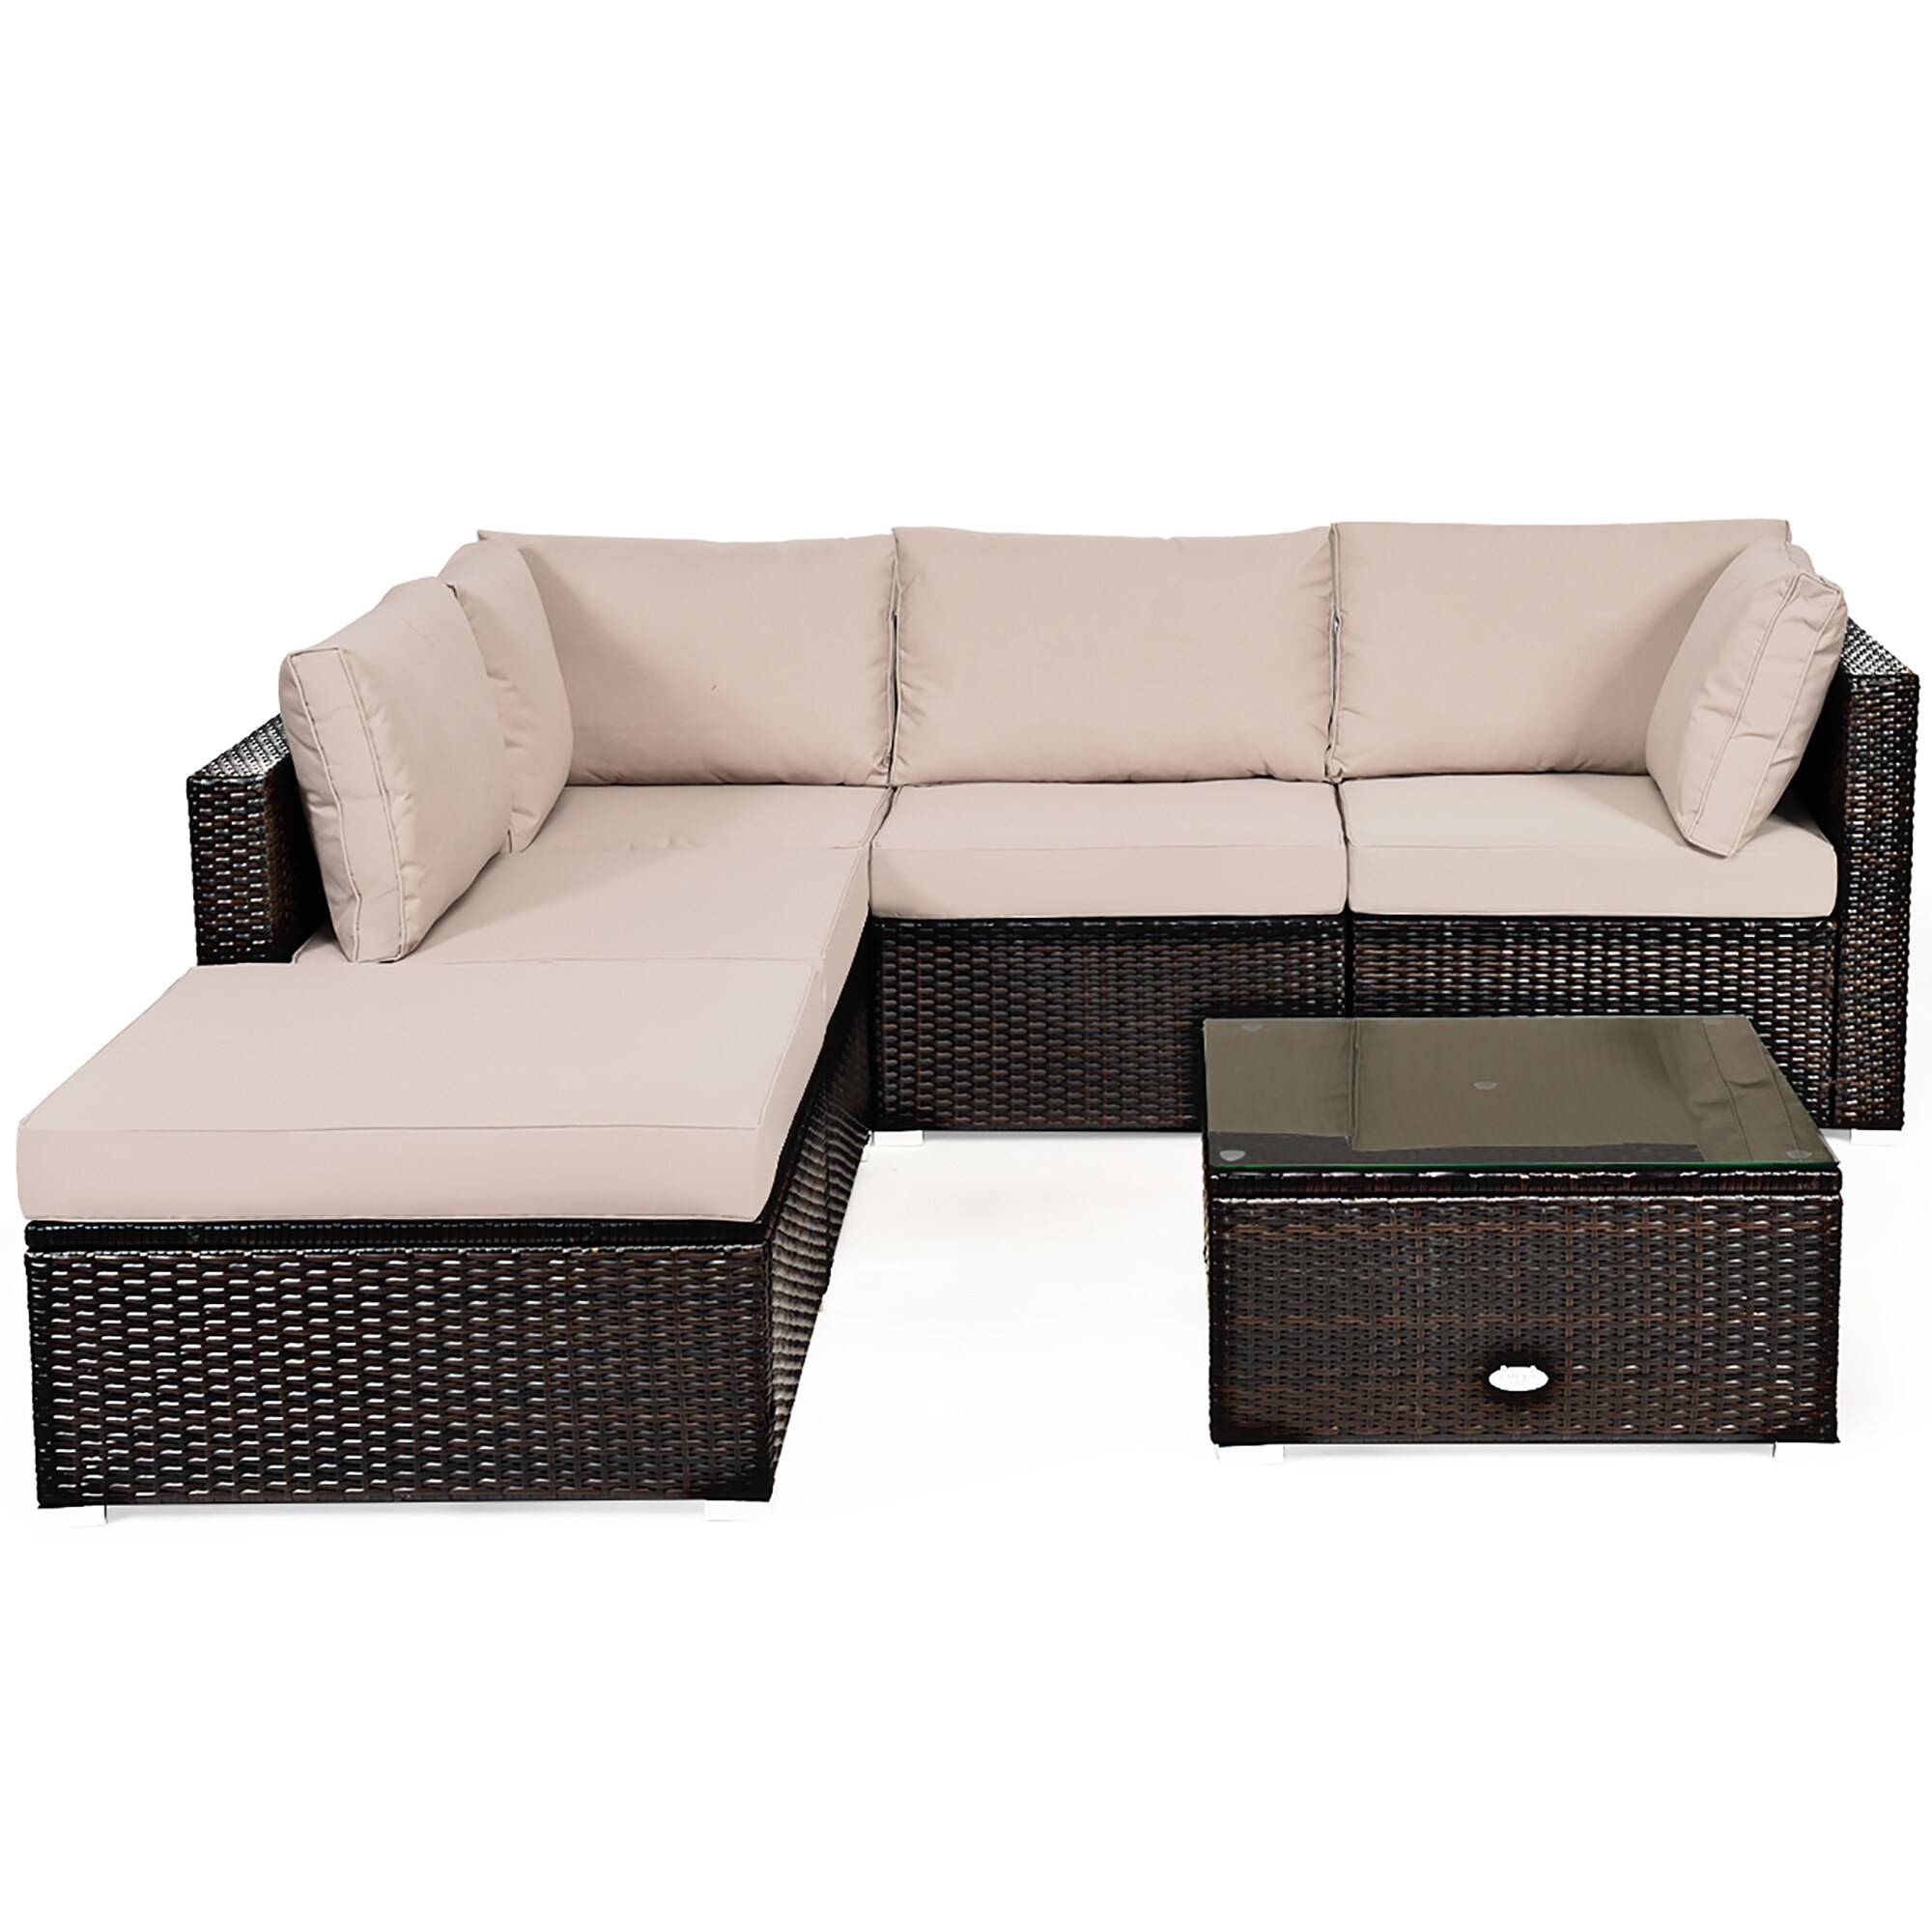 6 Piece Patio Furniture Set Outdoor Conversation Set With Coffee Table